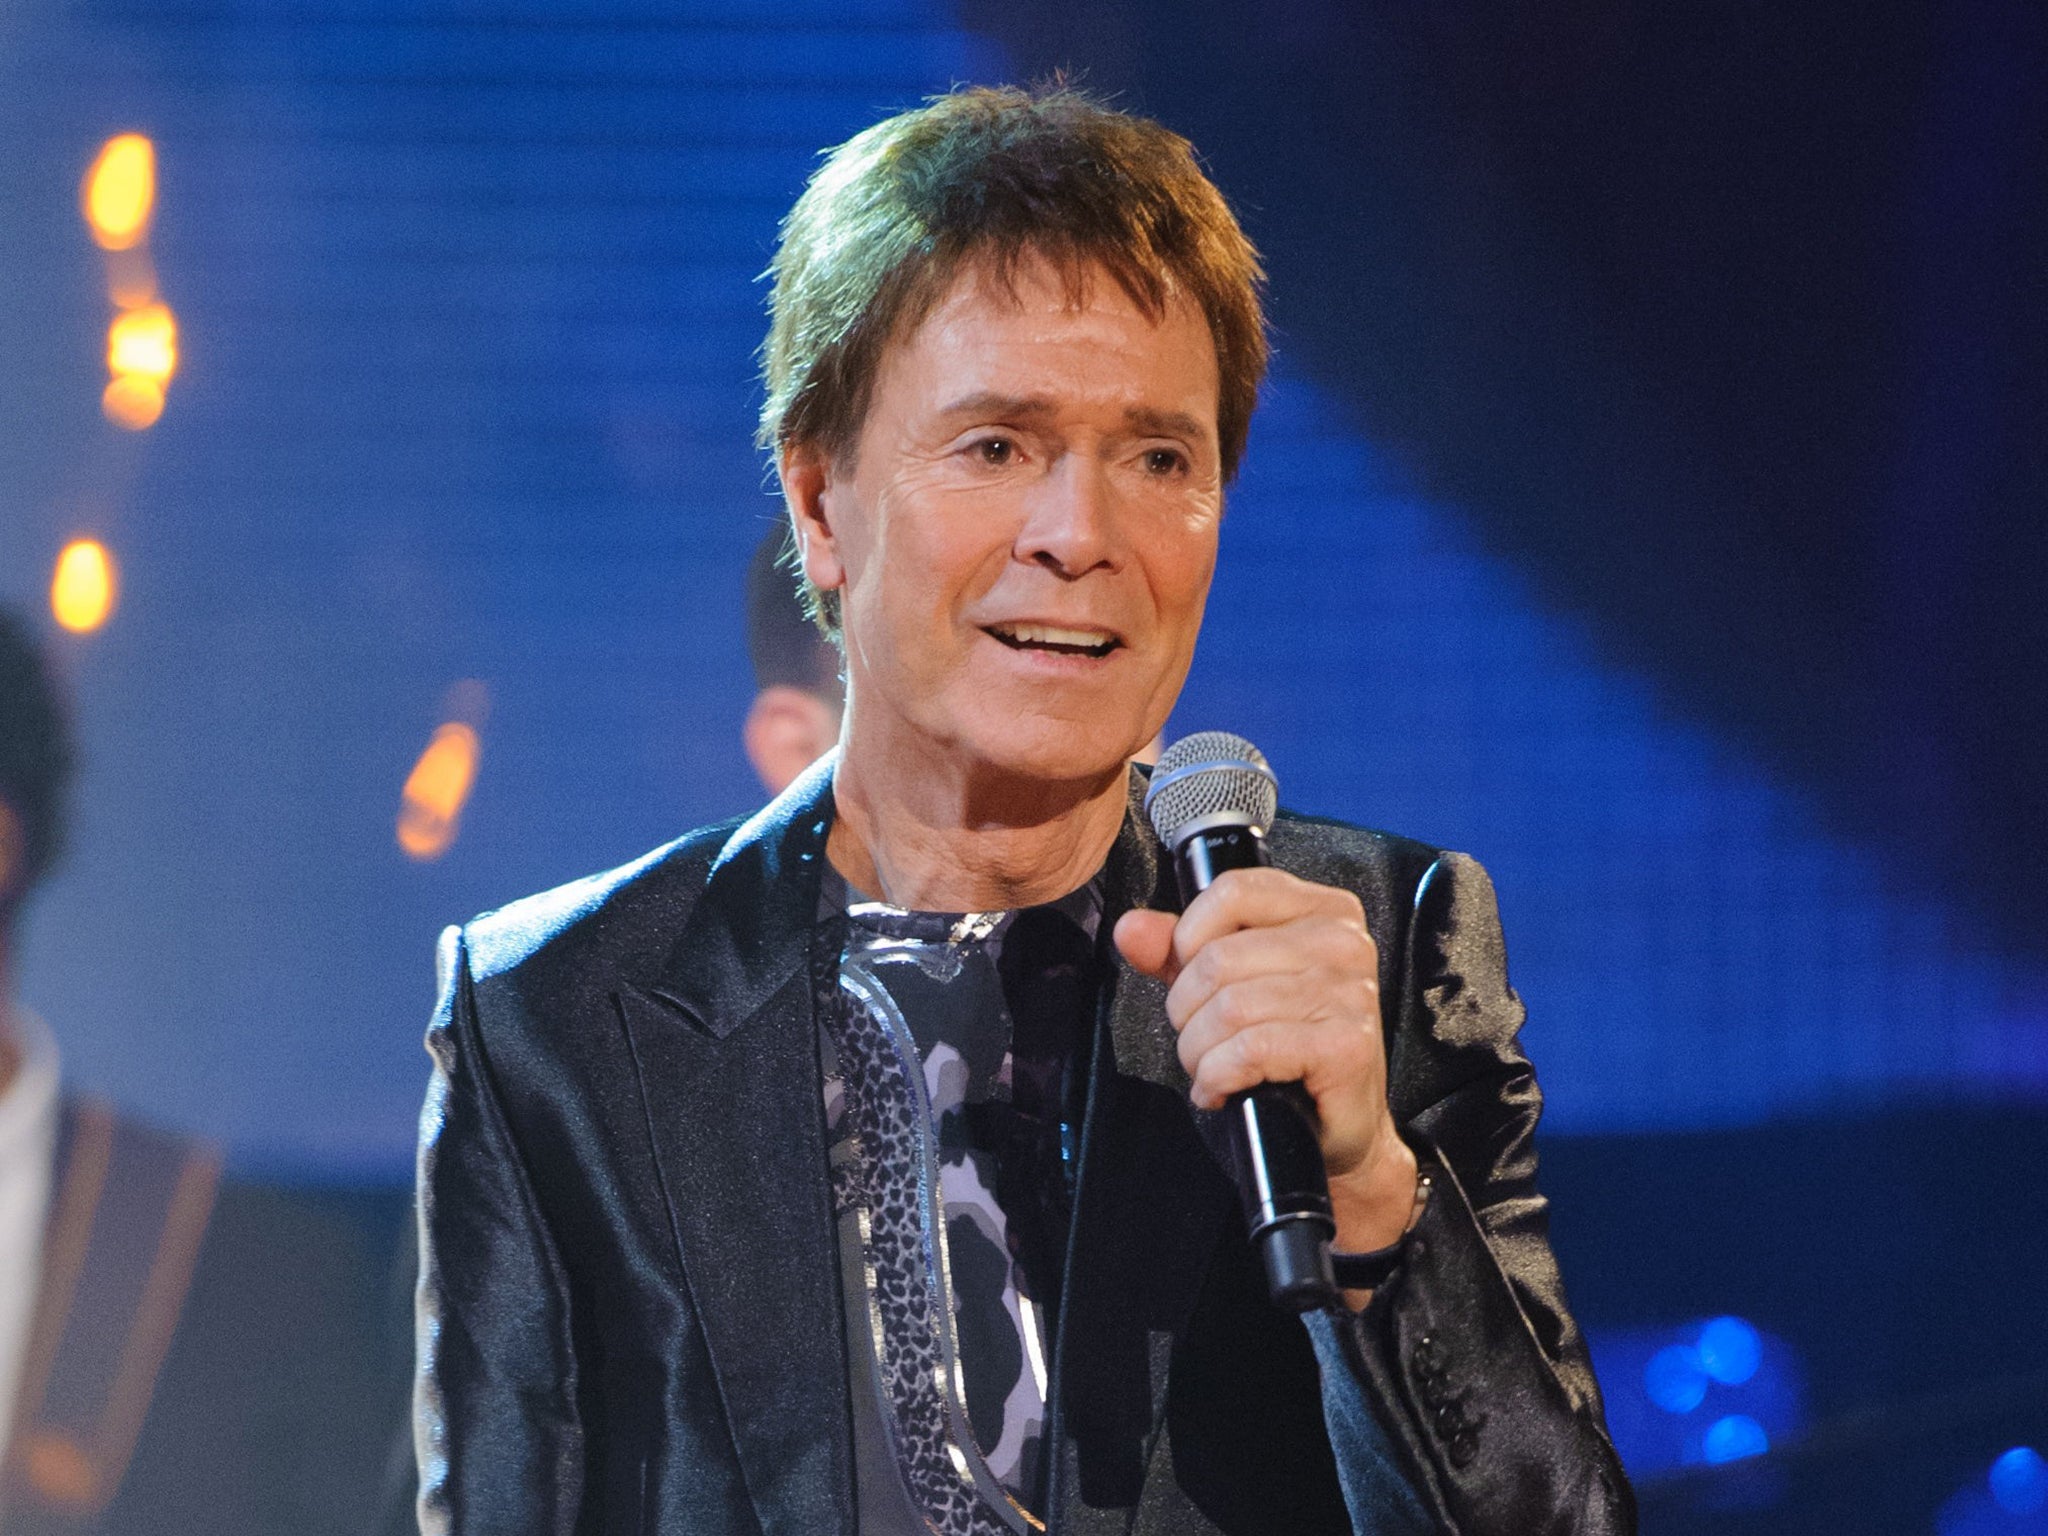 Sir Cliff Richard’s legal team have accused the Home Affairs Committee and its chairman Keith Vaz of unfairly causing the singer “extremely damaging” media coverage